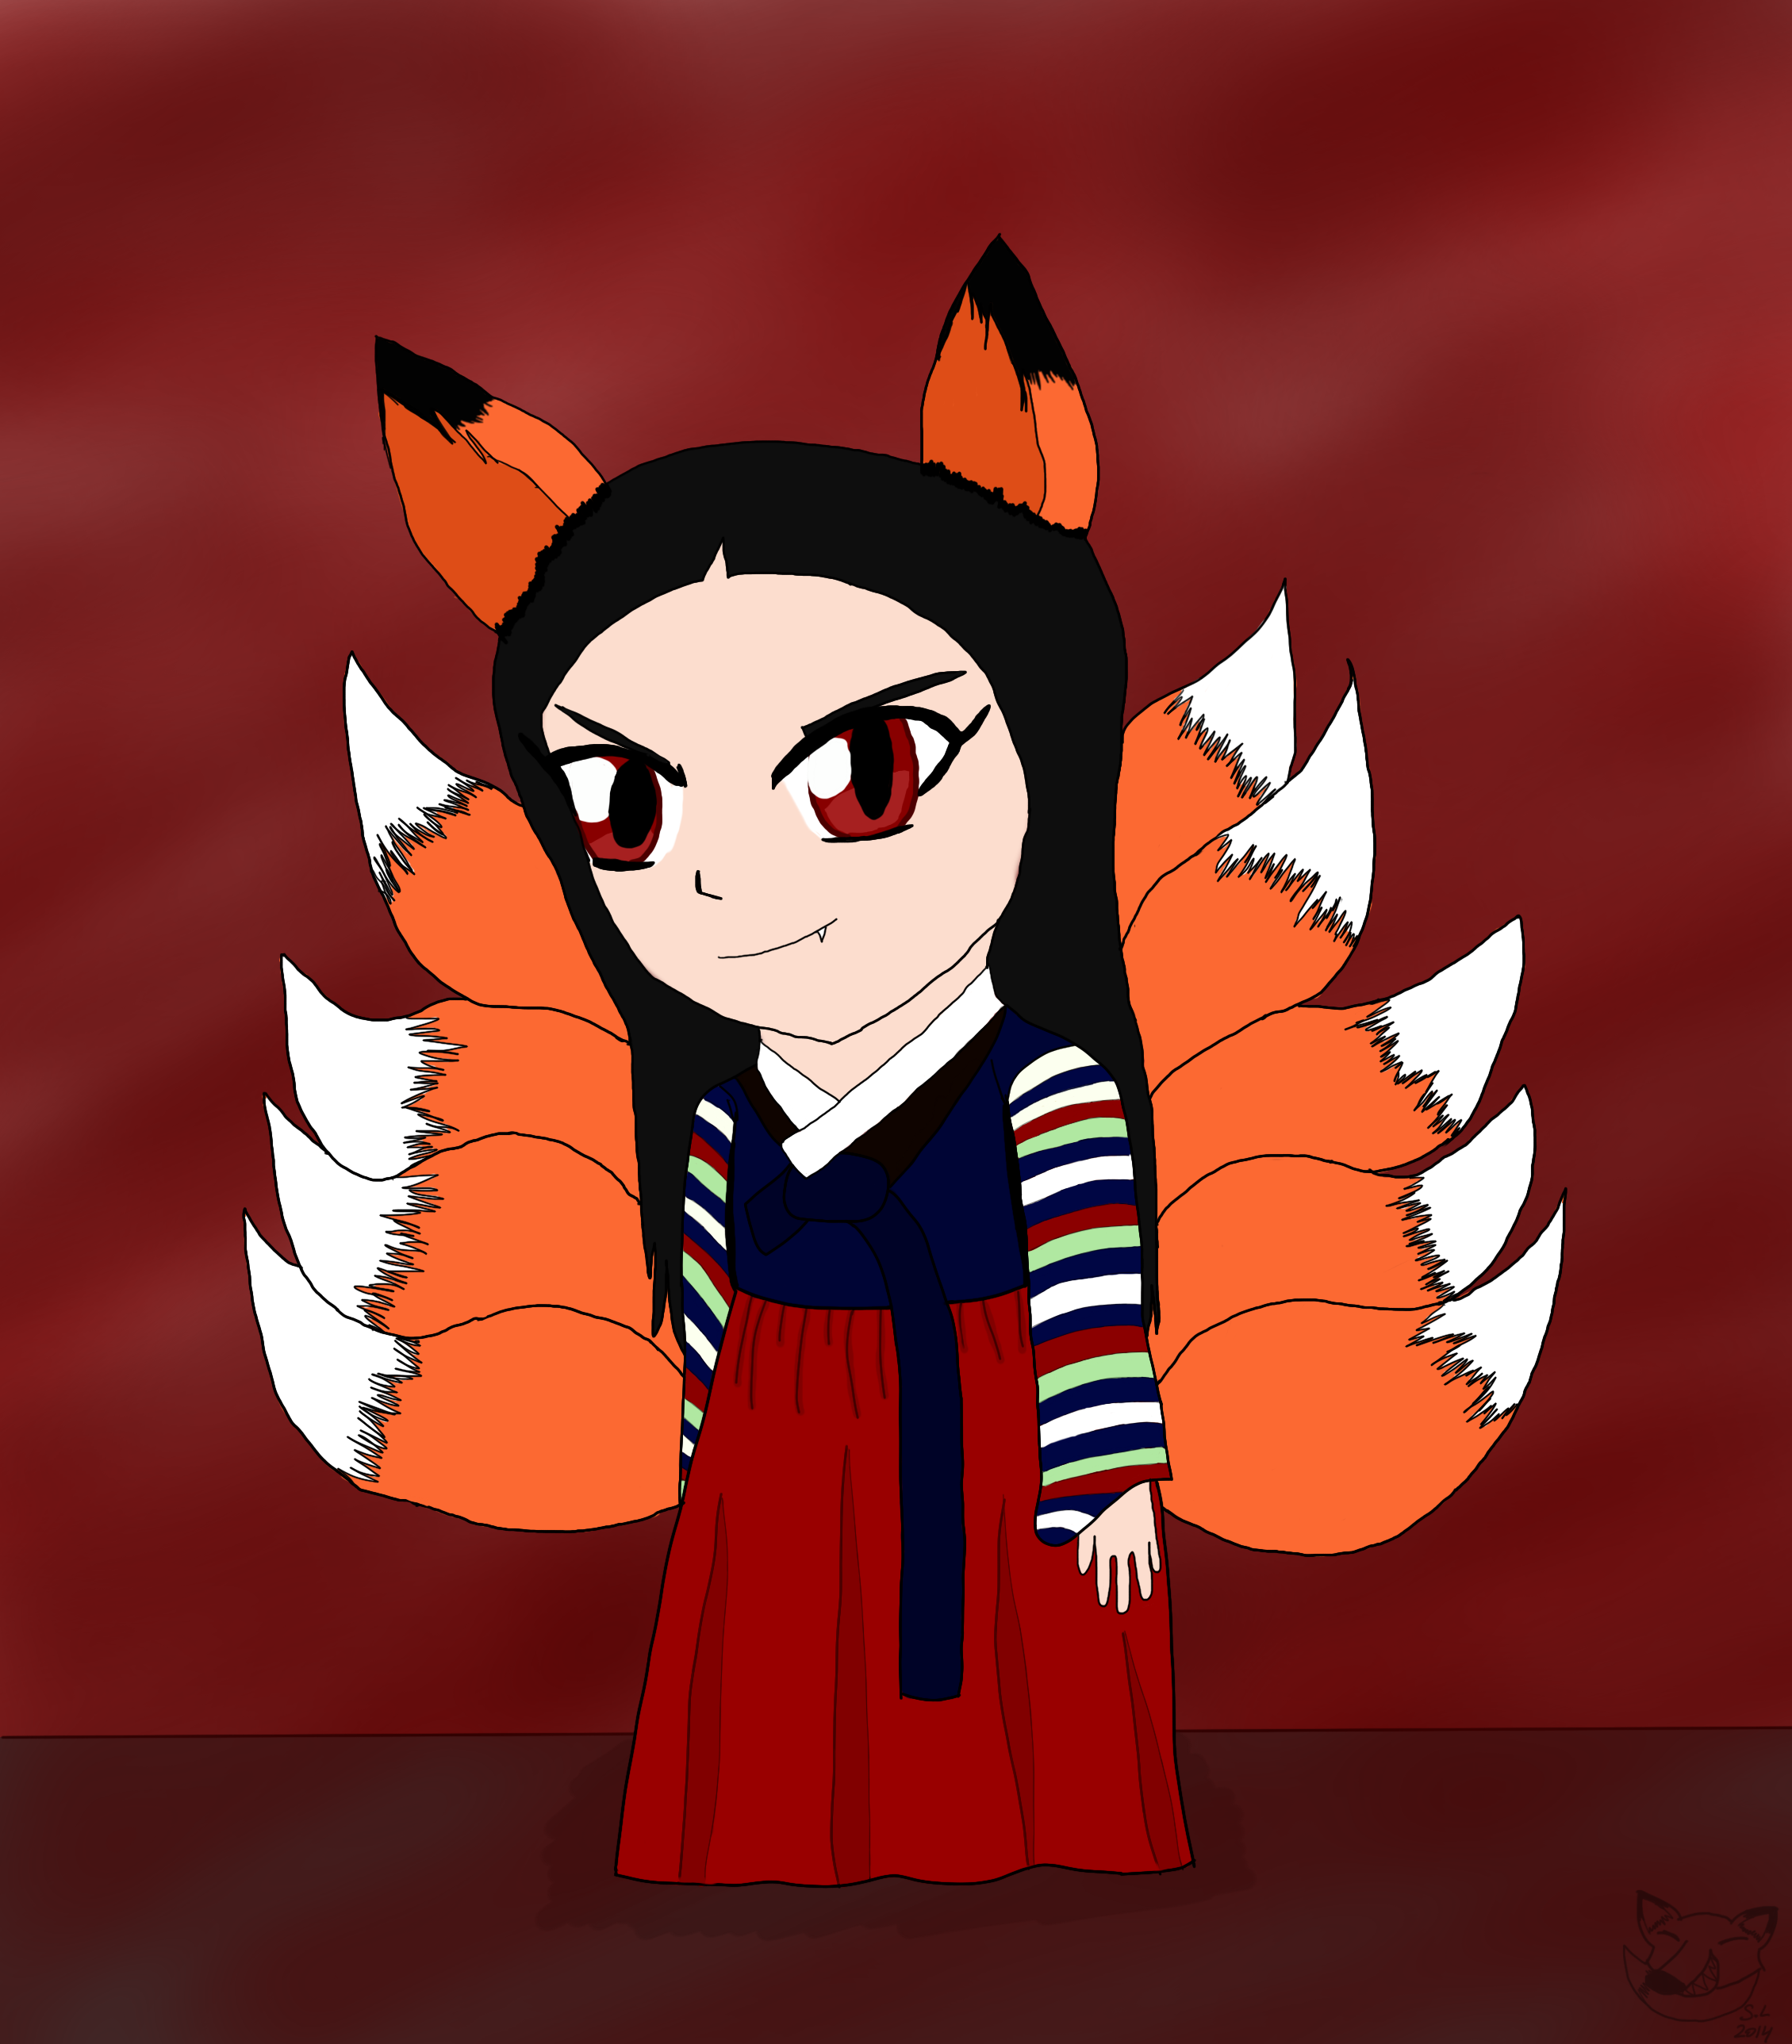 SCP-953 (Nine-tailed fox) by Wampa842 on DeviantArt